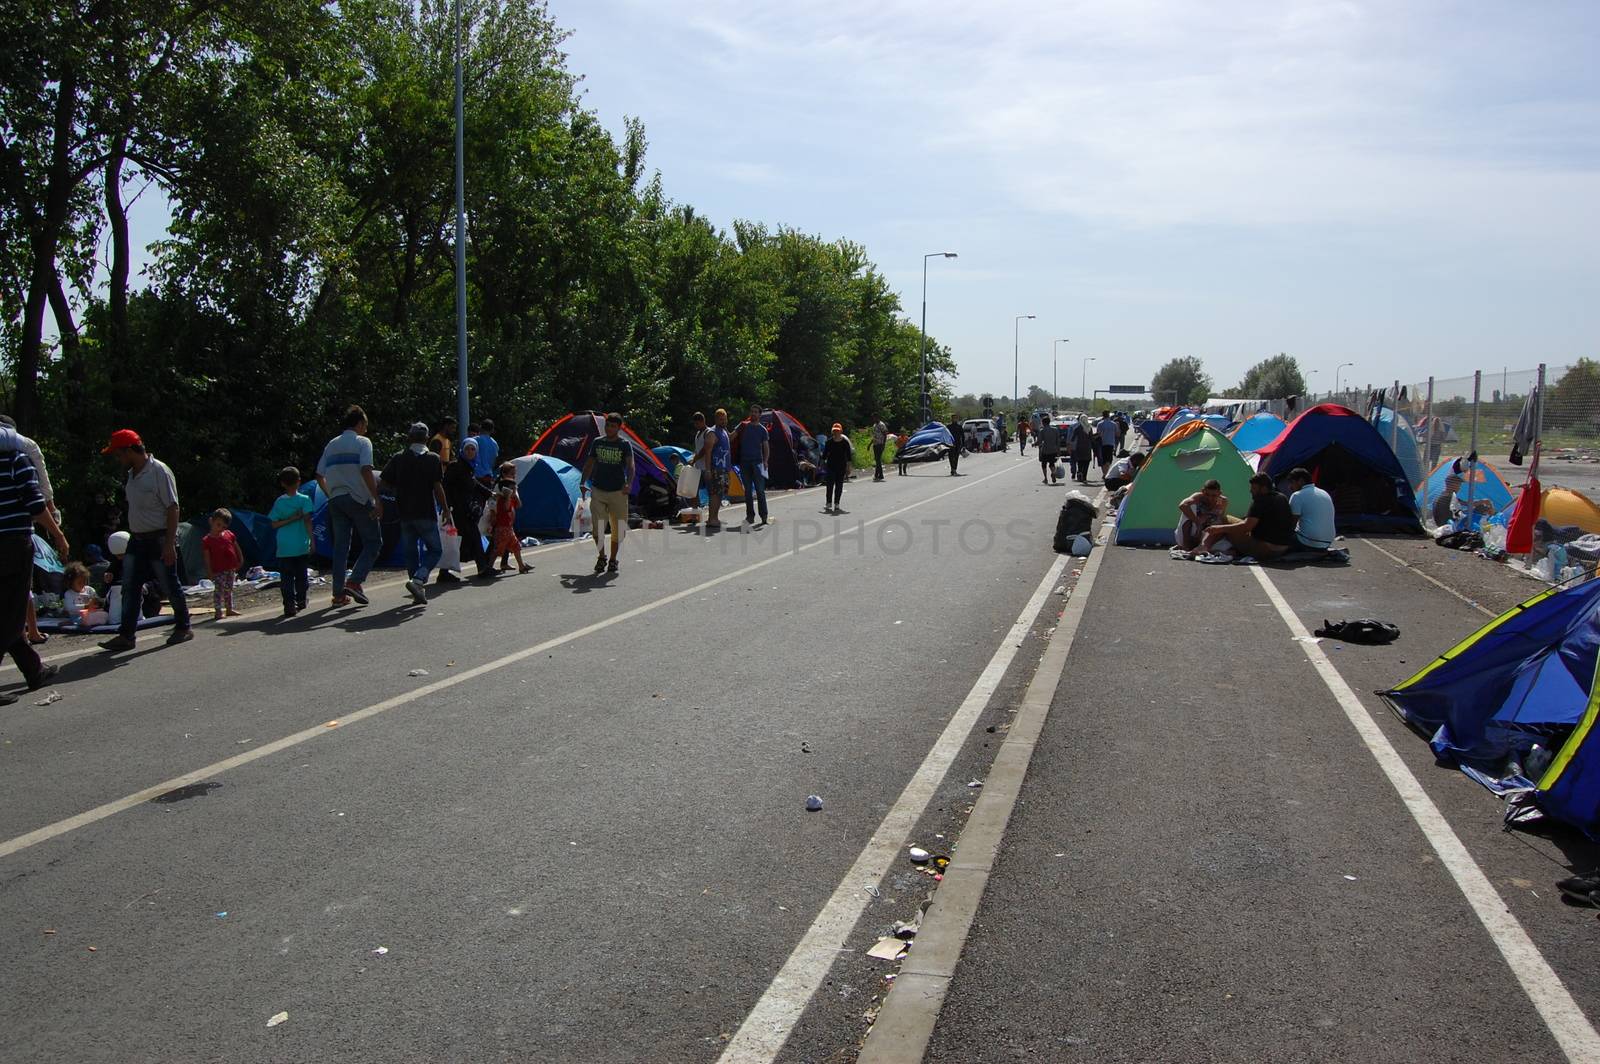 SERBIA, Horgo�: Migrants walk along a road and sit in tents at the Serbia-Hungary border in Horgo�, Serbia on September 17, 2015. Recently the migrants have clashed with police forcing the police to use tear gas and water cannons to hold the refugees at bay. The migrants demanded that the razor-wire fence be opened, which would allow them to continue their journey though Europe. 